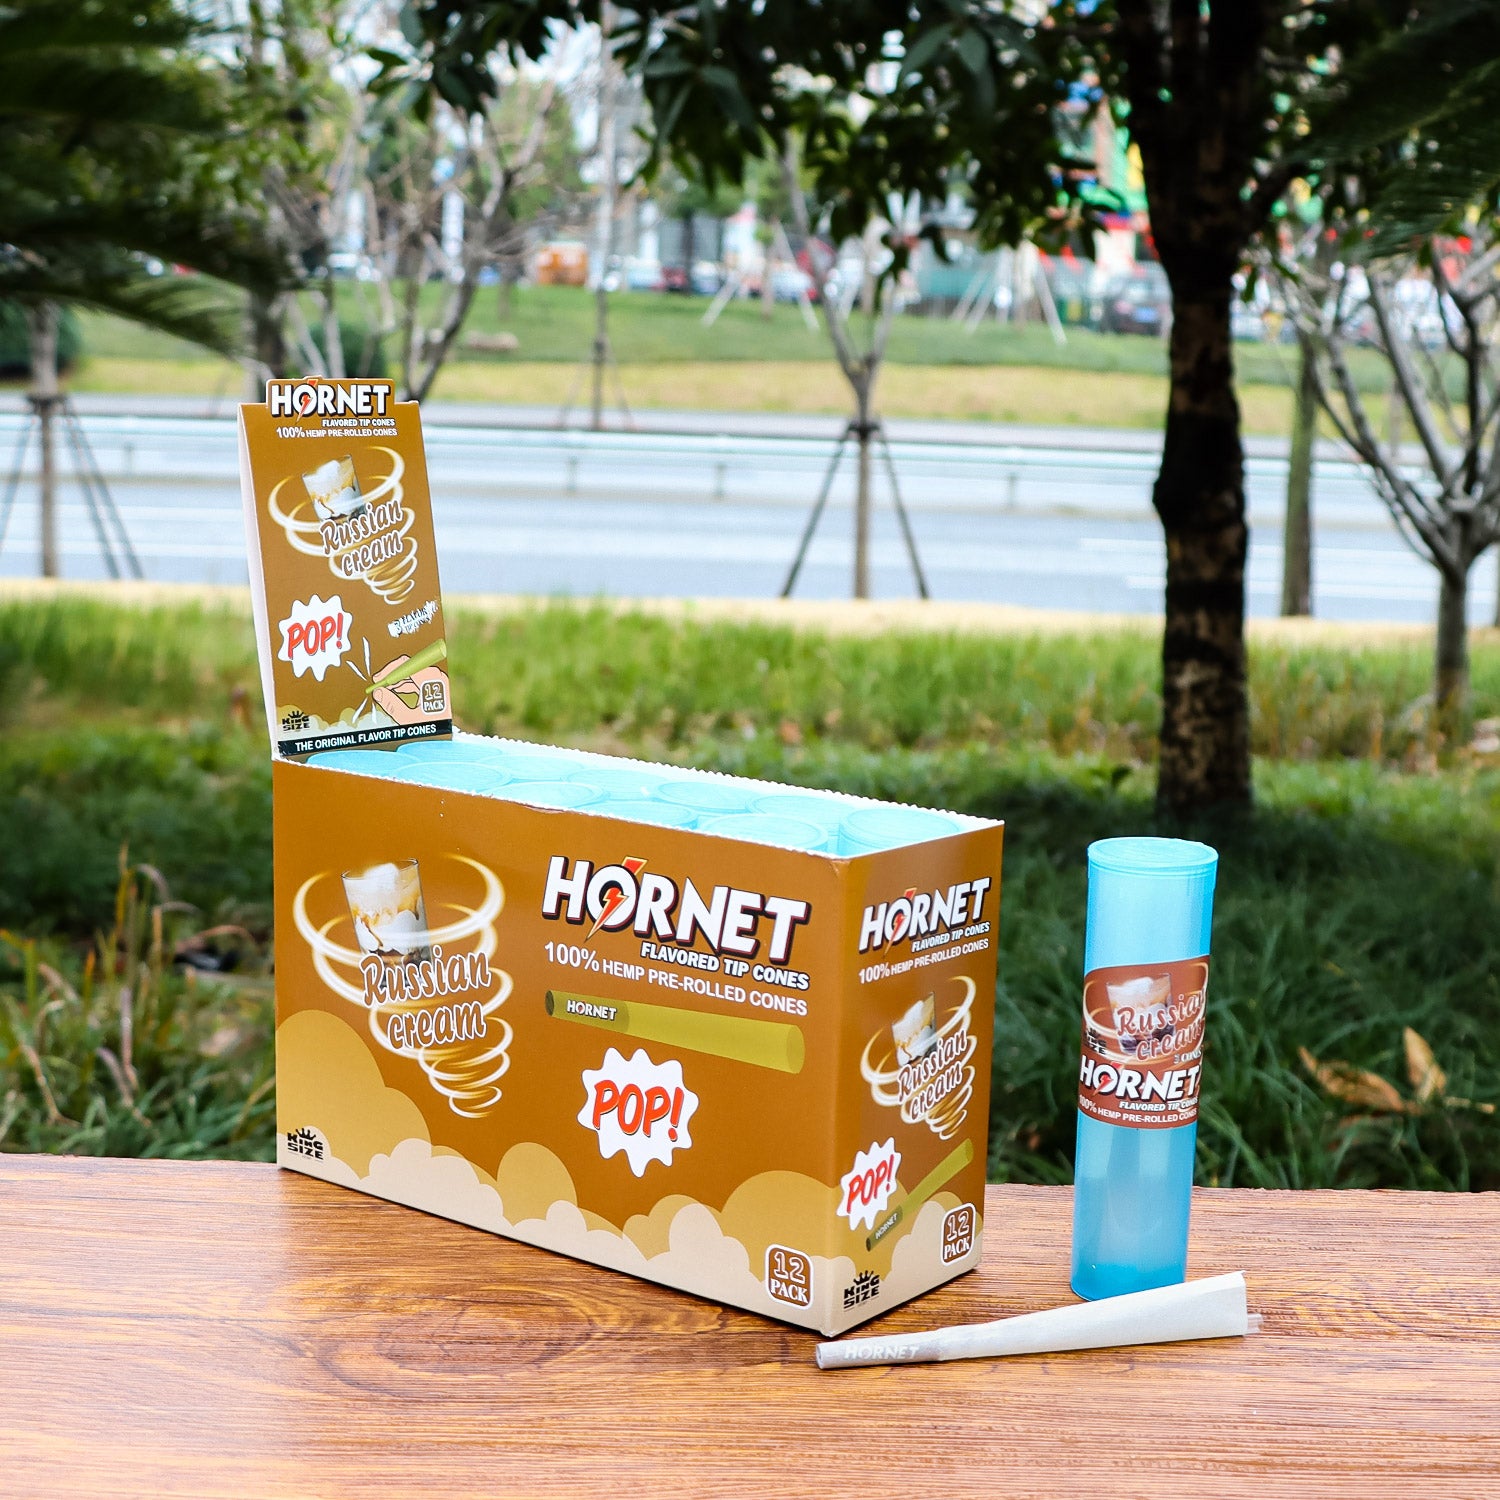 HORNET Cream Flavors Pre Rolled Cones, King Size Pre Rolled Rolling Paper With Tips, Slow Burning Rolling Cones & Flavored Pop, 3 PCS / Tube, 12 Tubes / Box